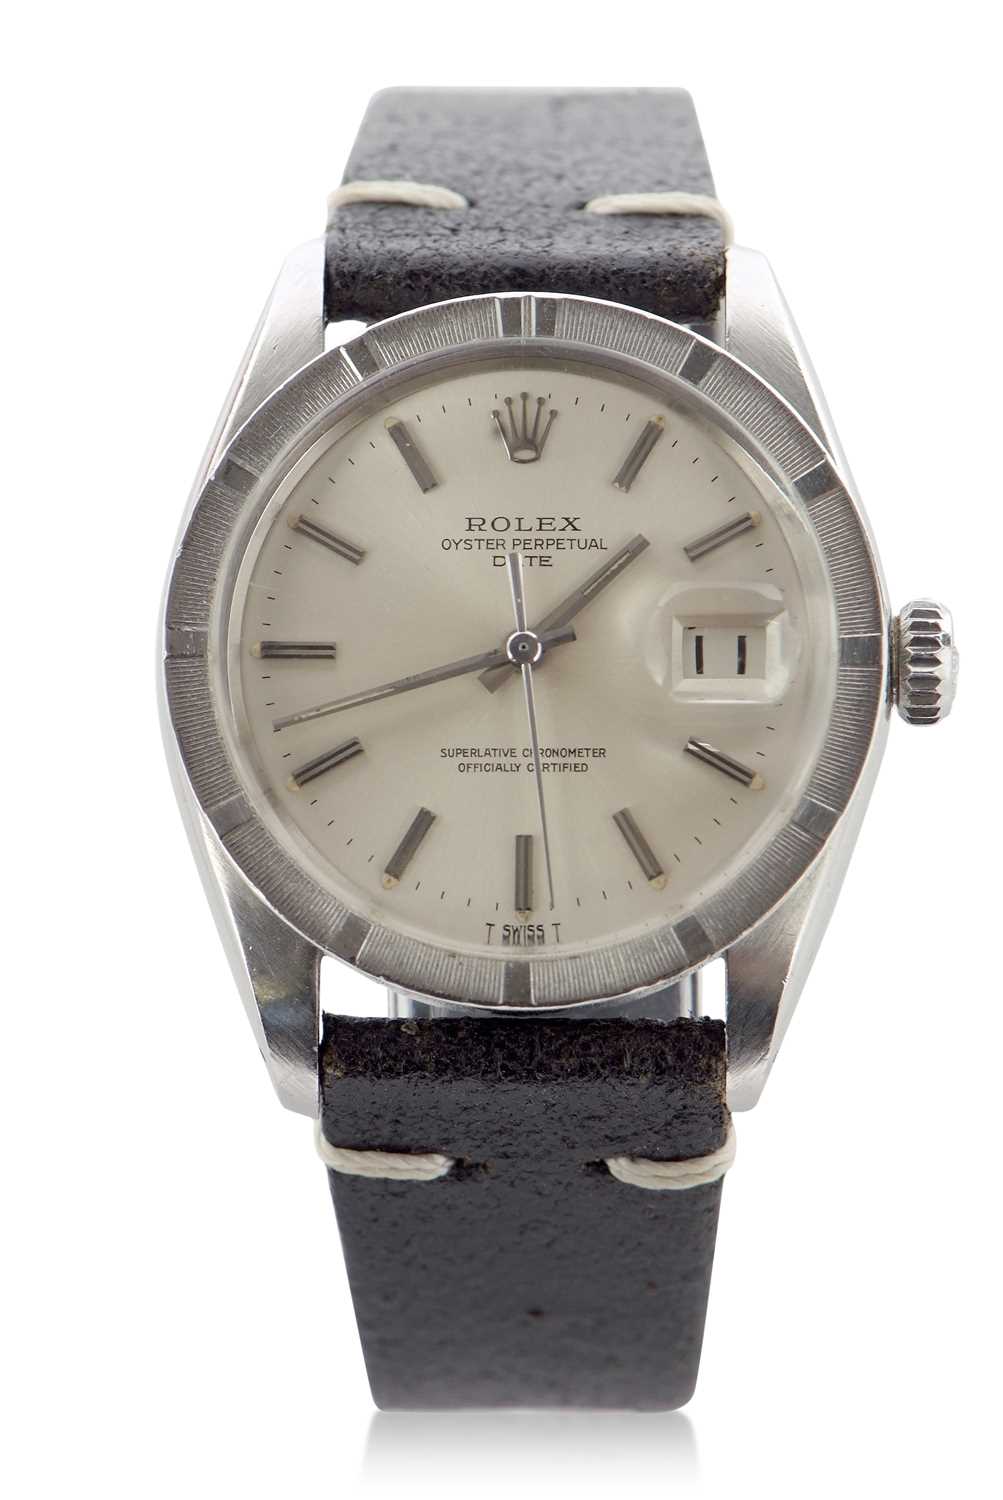 A Rolex Oyster Perpetual Date 1501, the watch has an automatic movement, screw down crown and